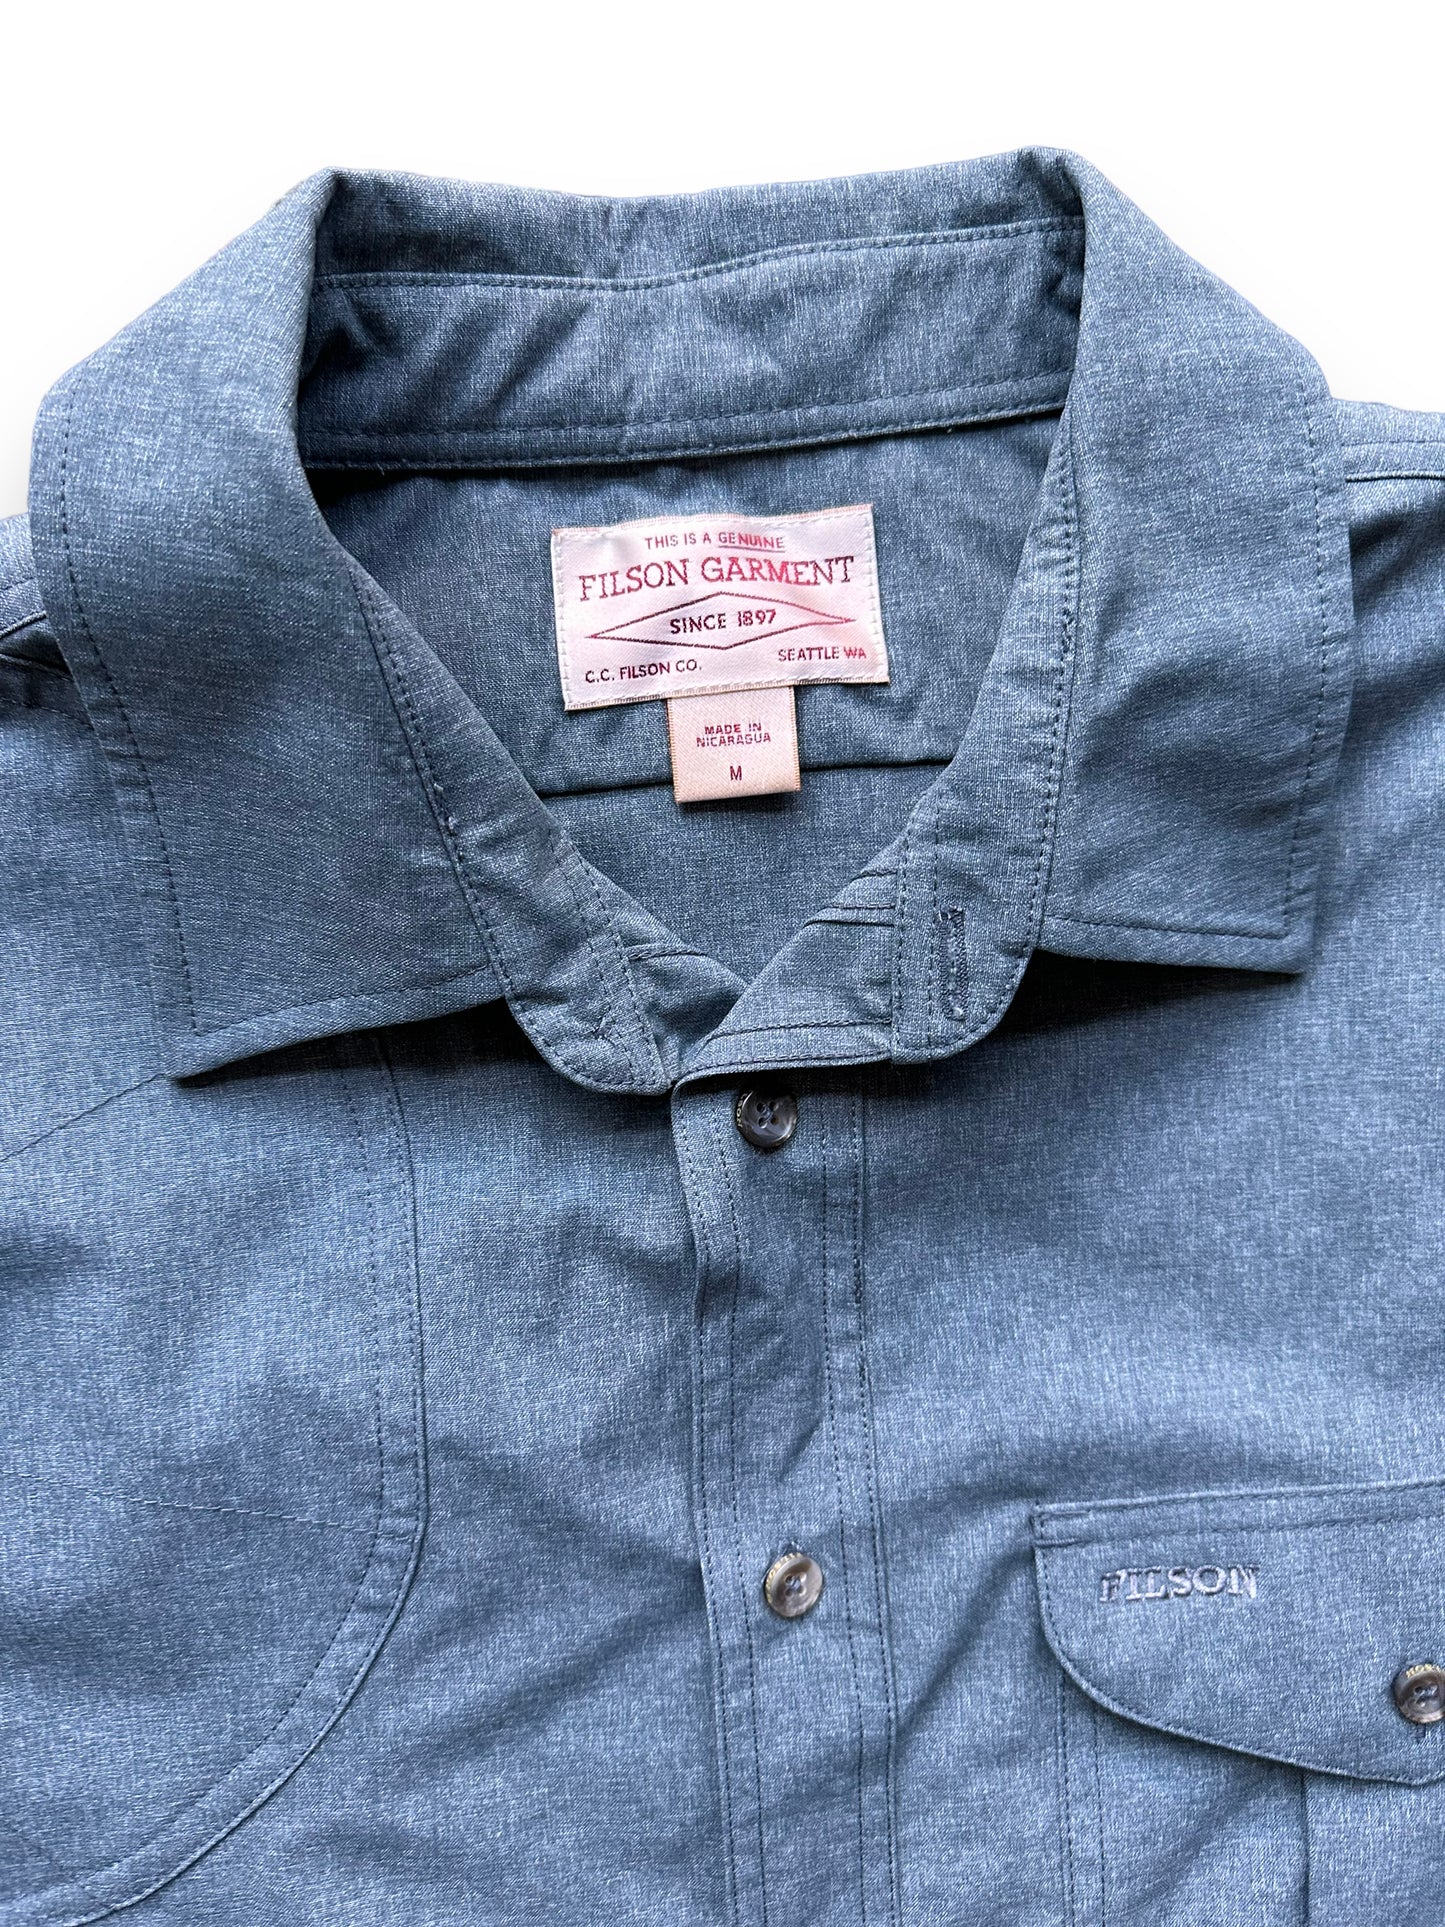 Filson Tag View of Filson Carbon Blue Right Handed Shooting Shirt SZ M |  Barn Owl Vintage Goods | Vintage Filson Workwear Seattle